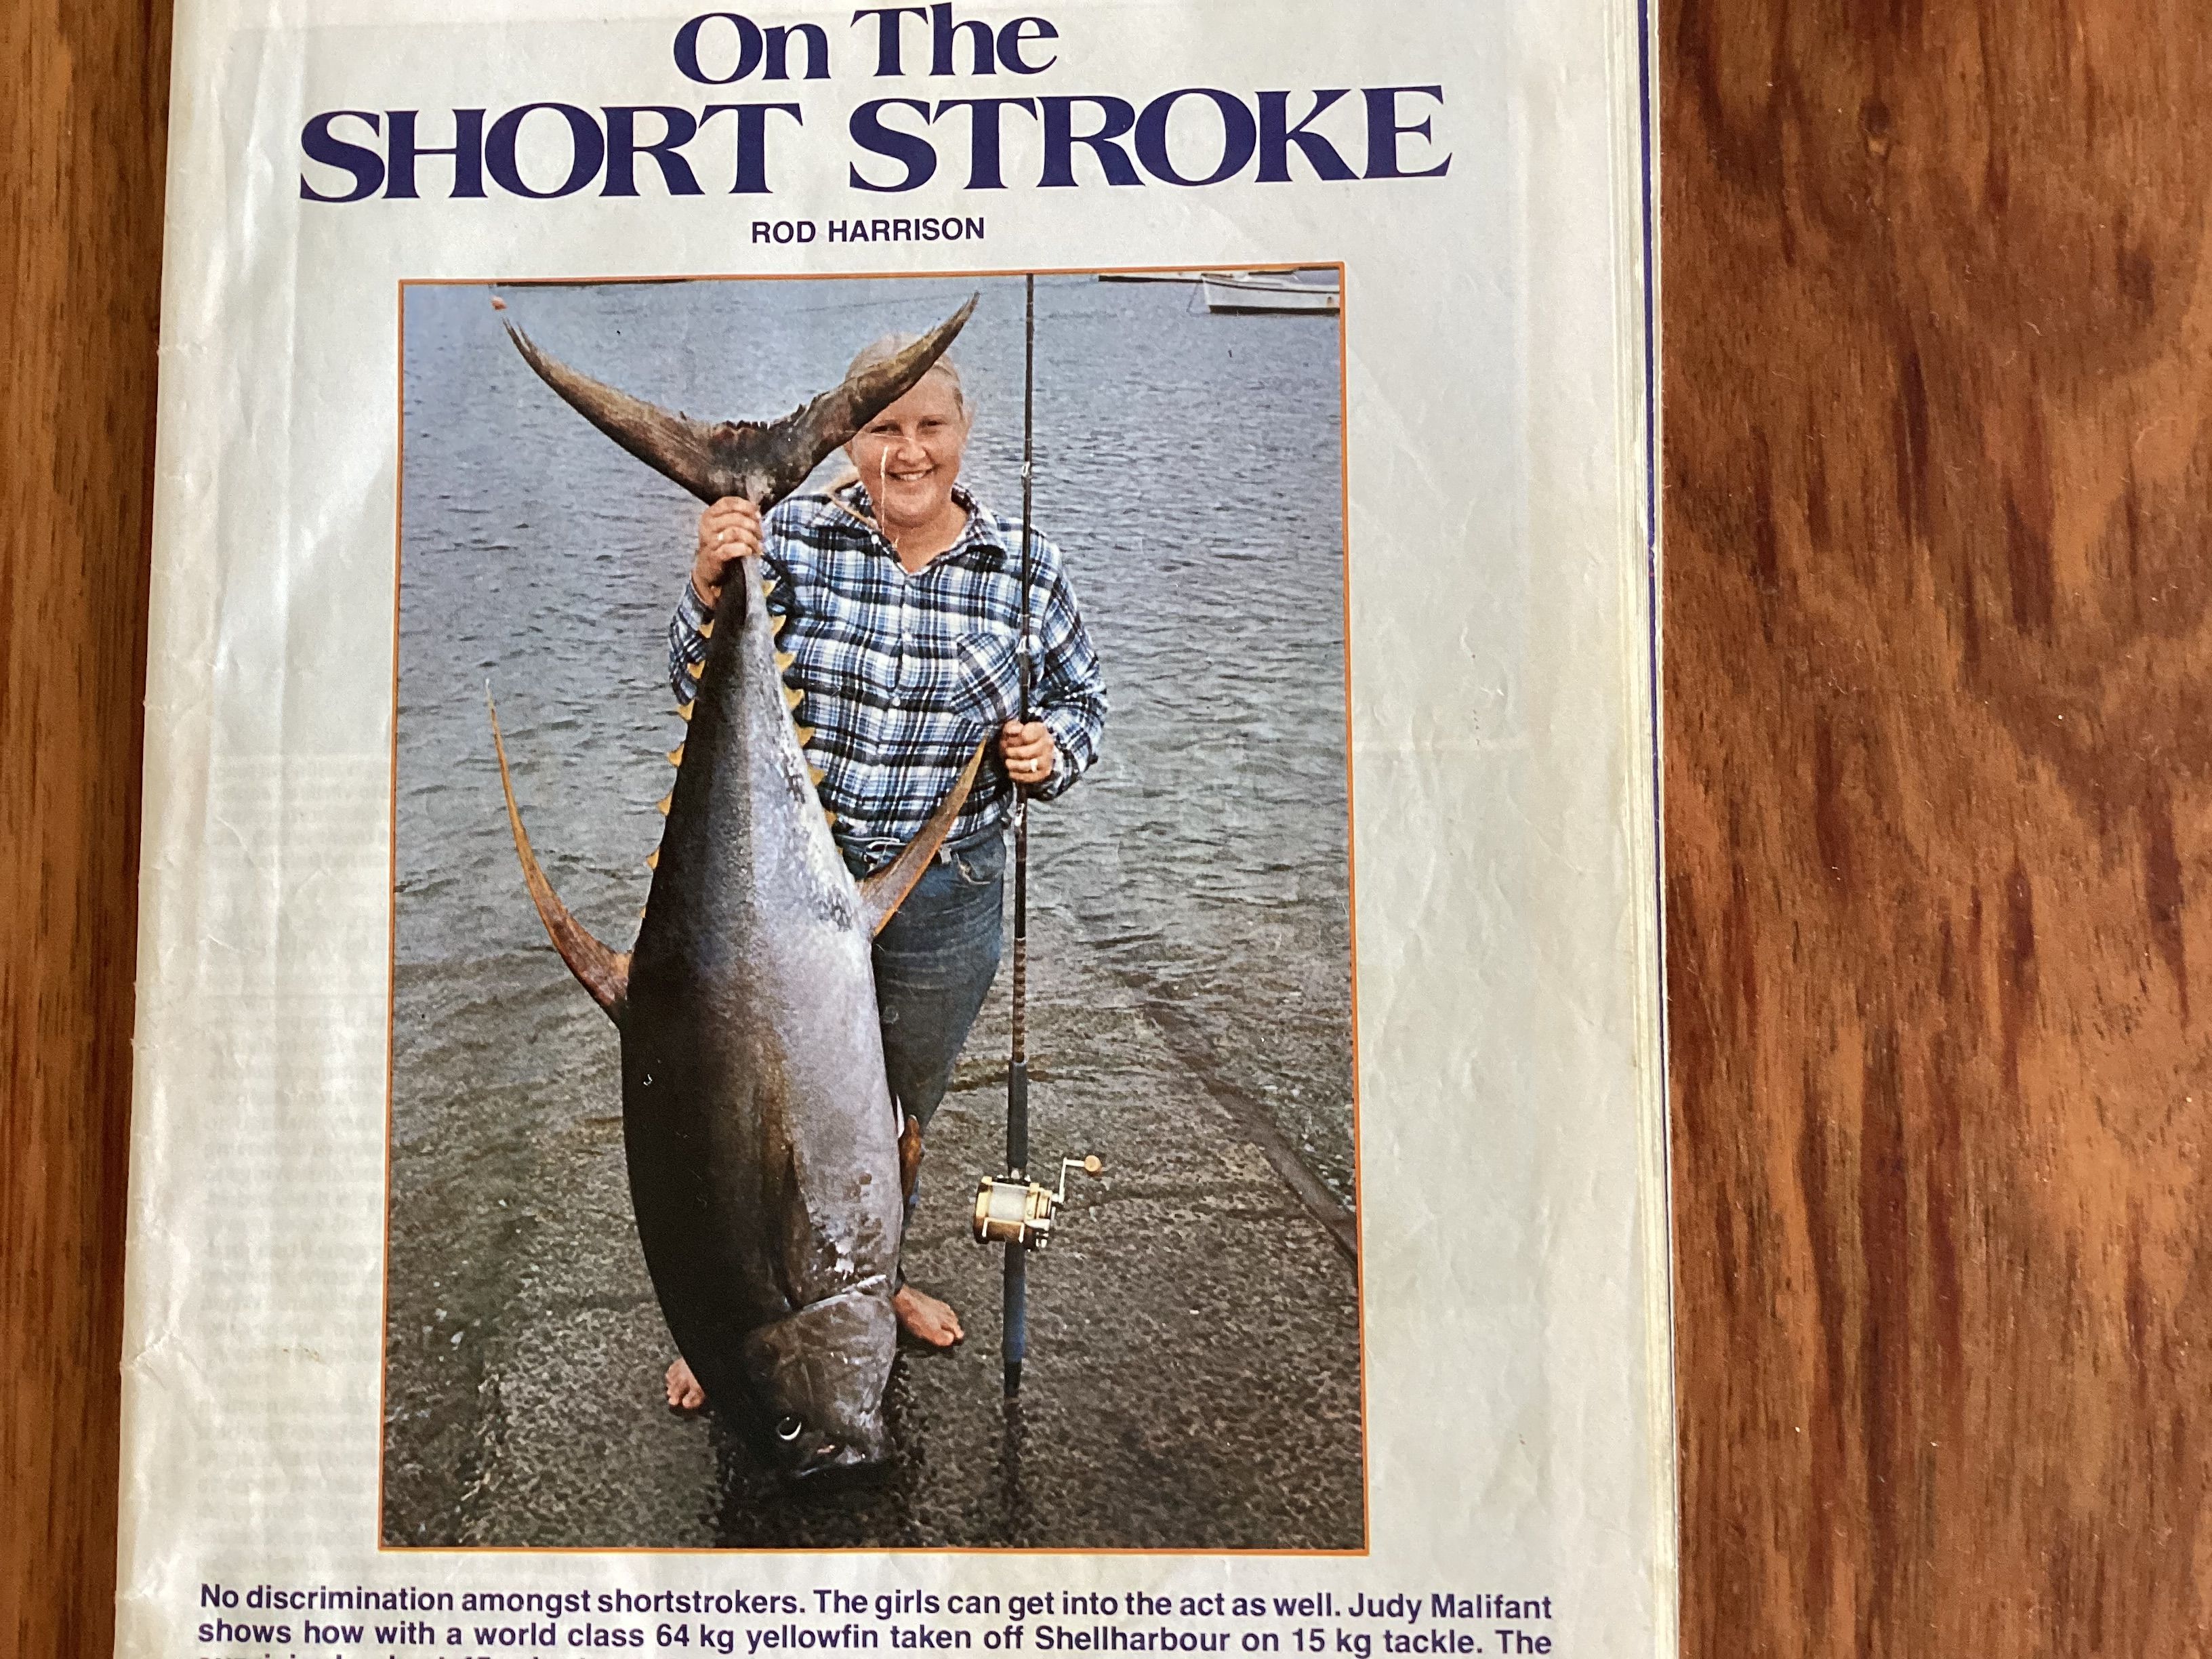 Old magazine - Saltwater Fishing Chat - DECKEE Community